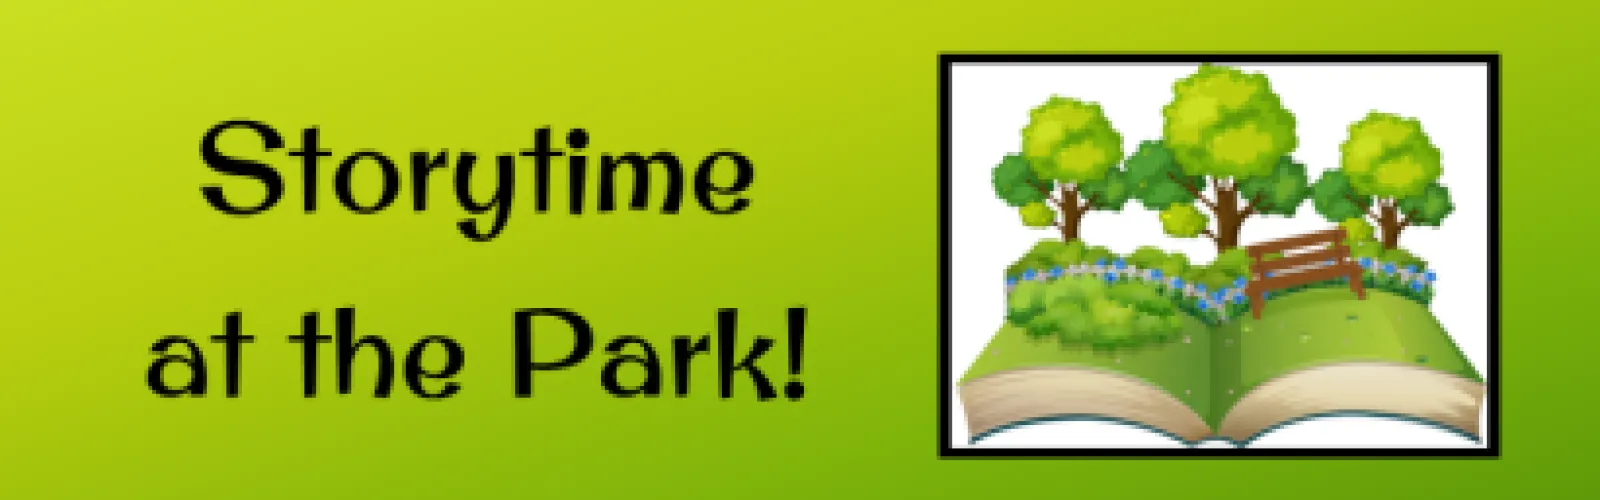 Storytime in the Park! Green background with an open book with trees and a bench